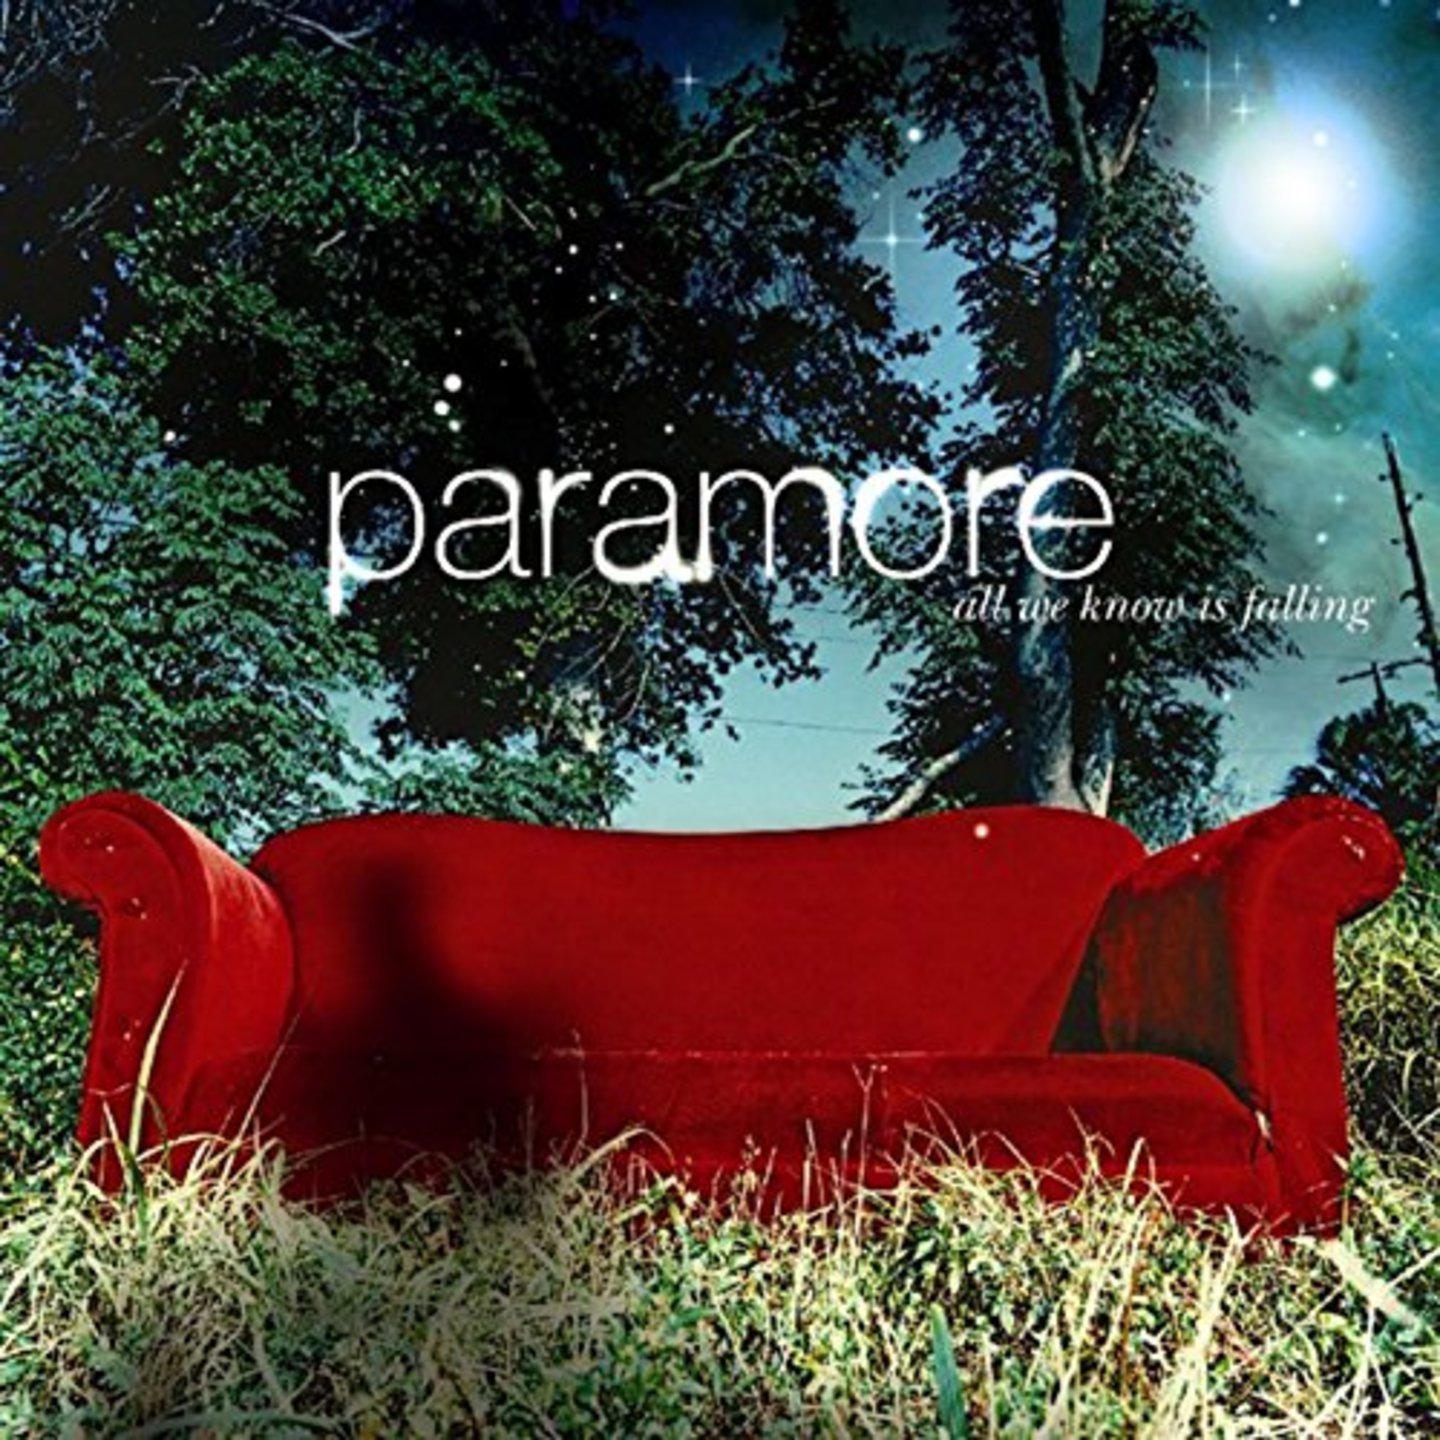 PARAMORE - All We Know Is Falling LP FBR Anniversary Edition, Silver vinyl